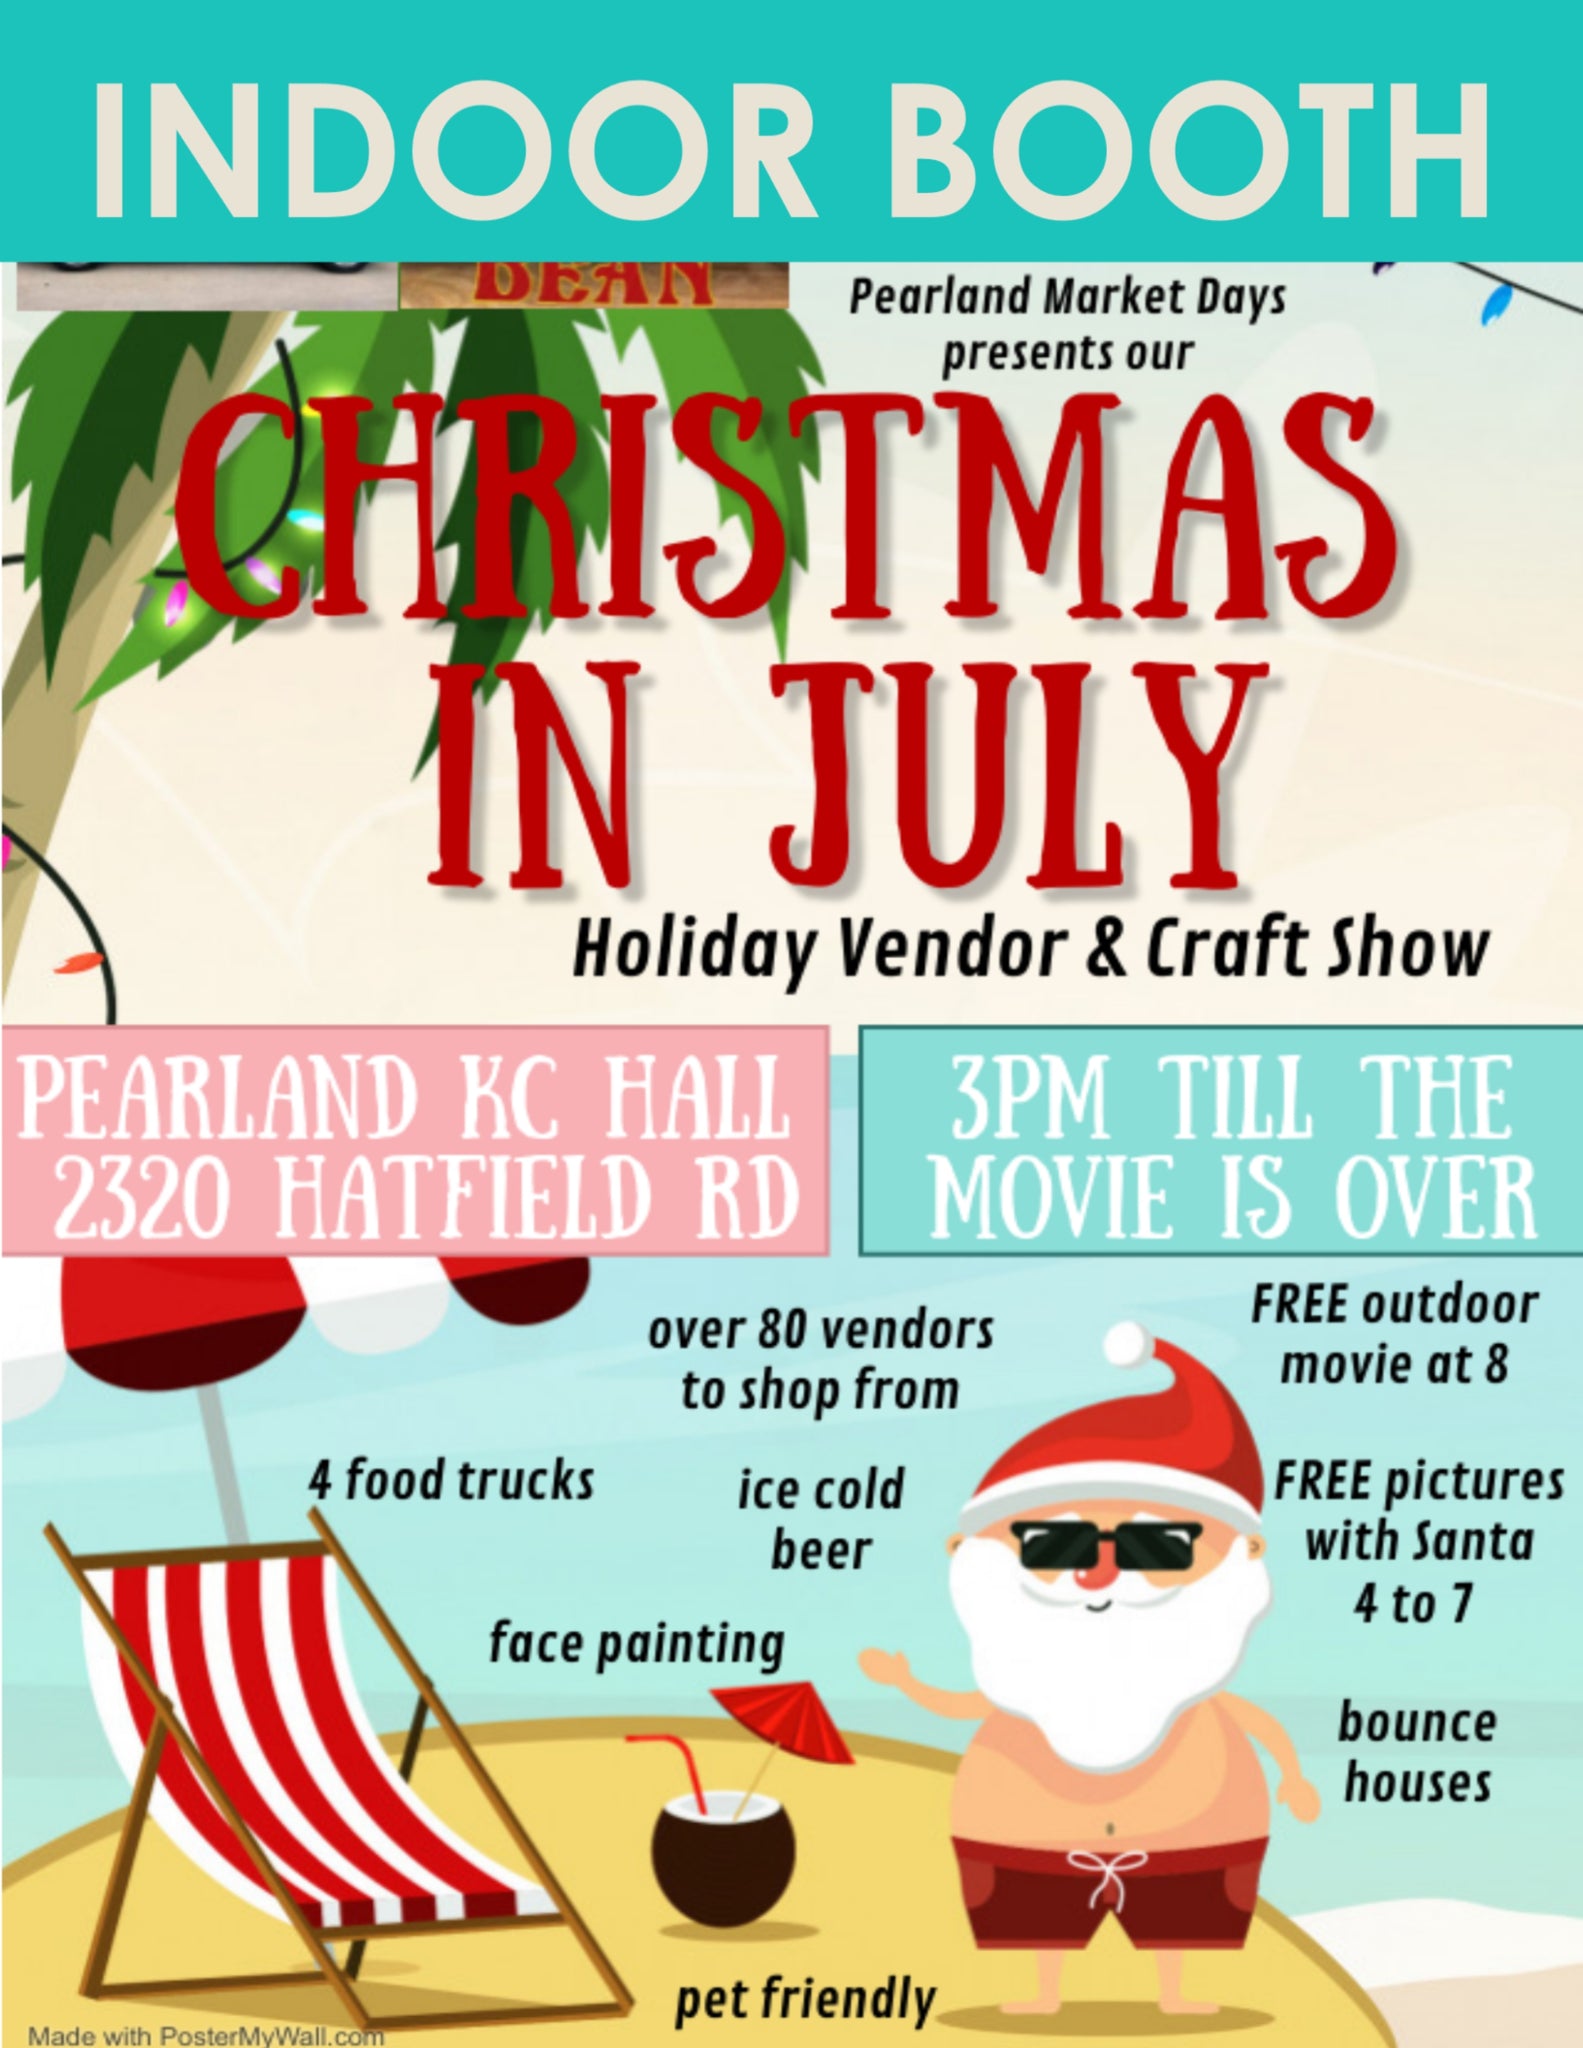 PEARLAND Saturday July 2, 2022 - INDOOR BOOTH